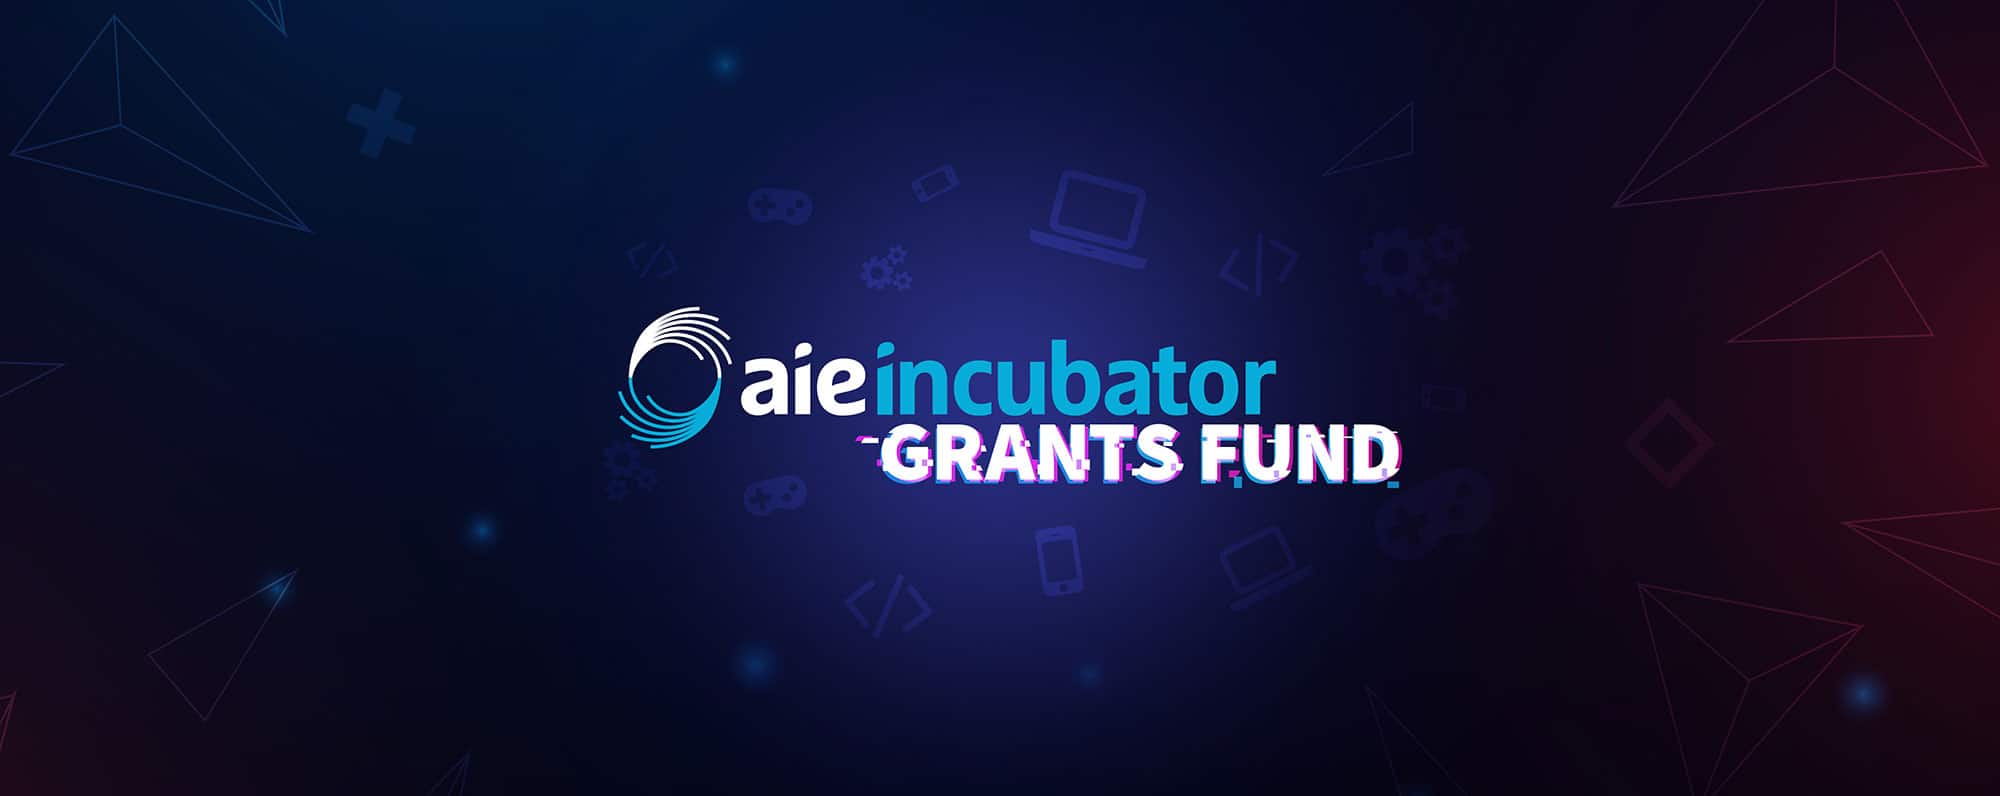 AIE Incubator Grants Fund | AIE